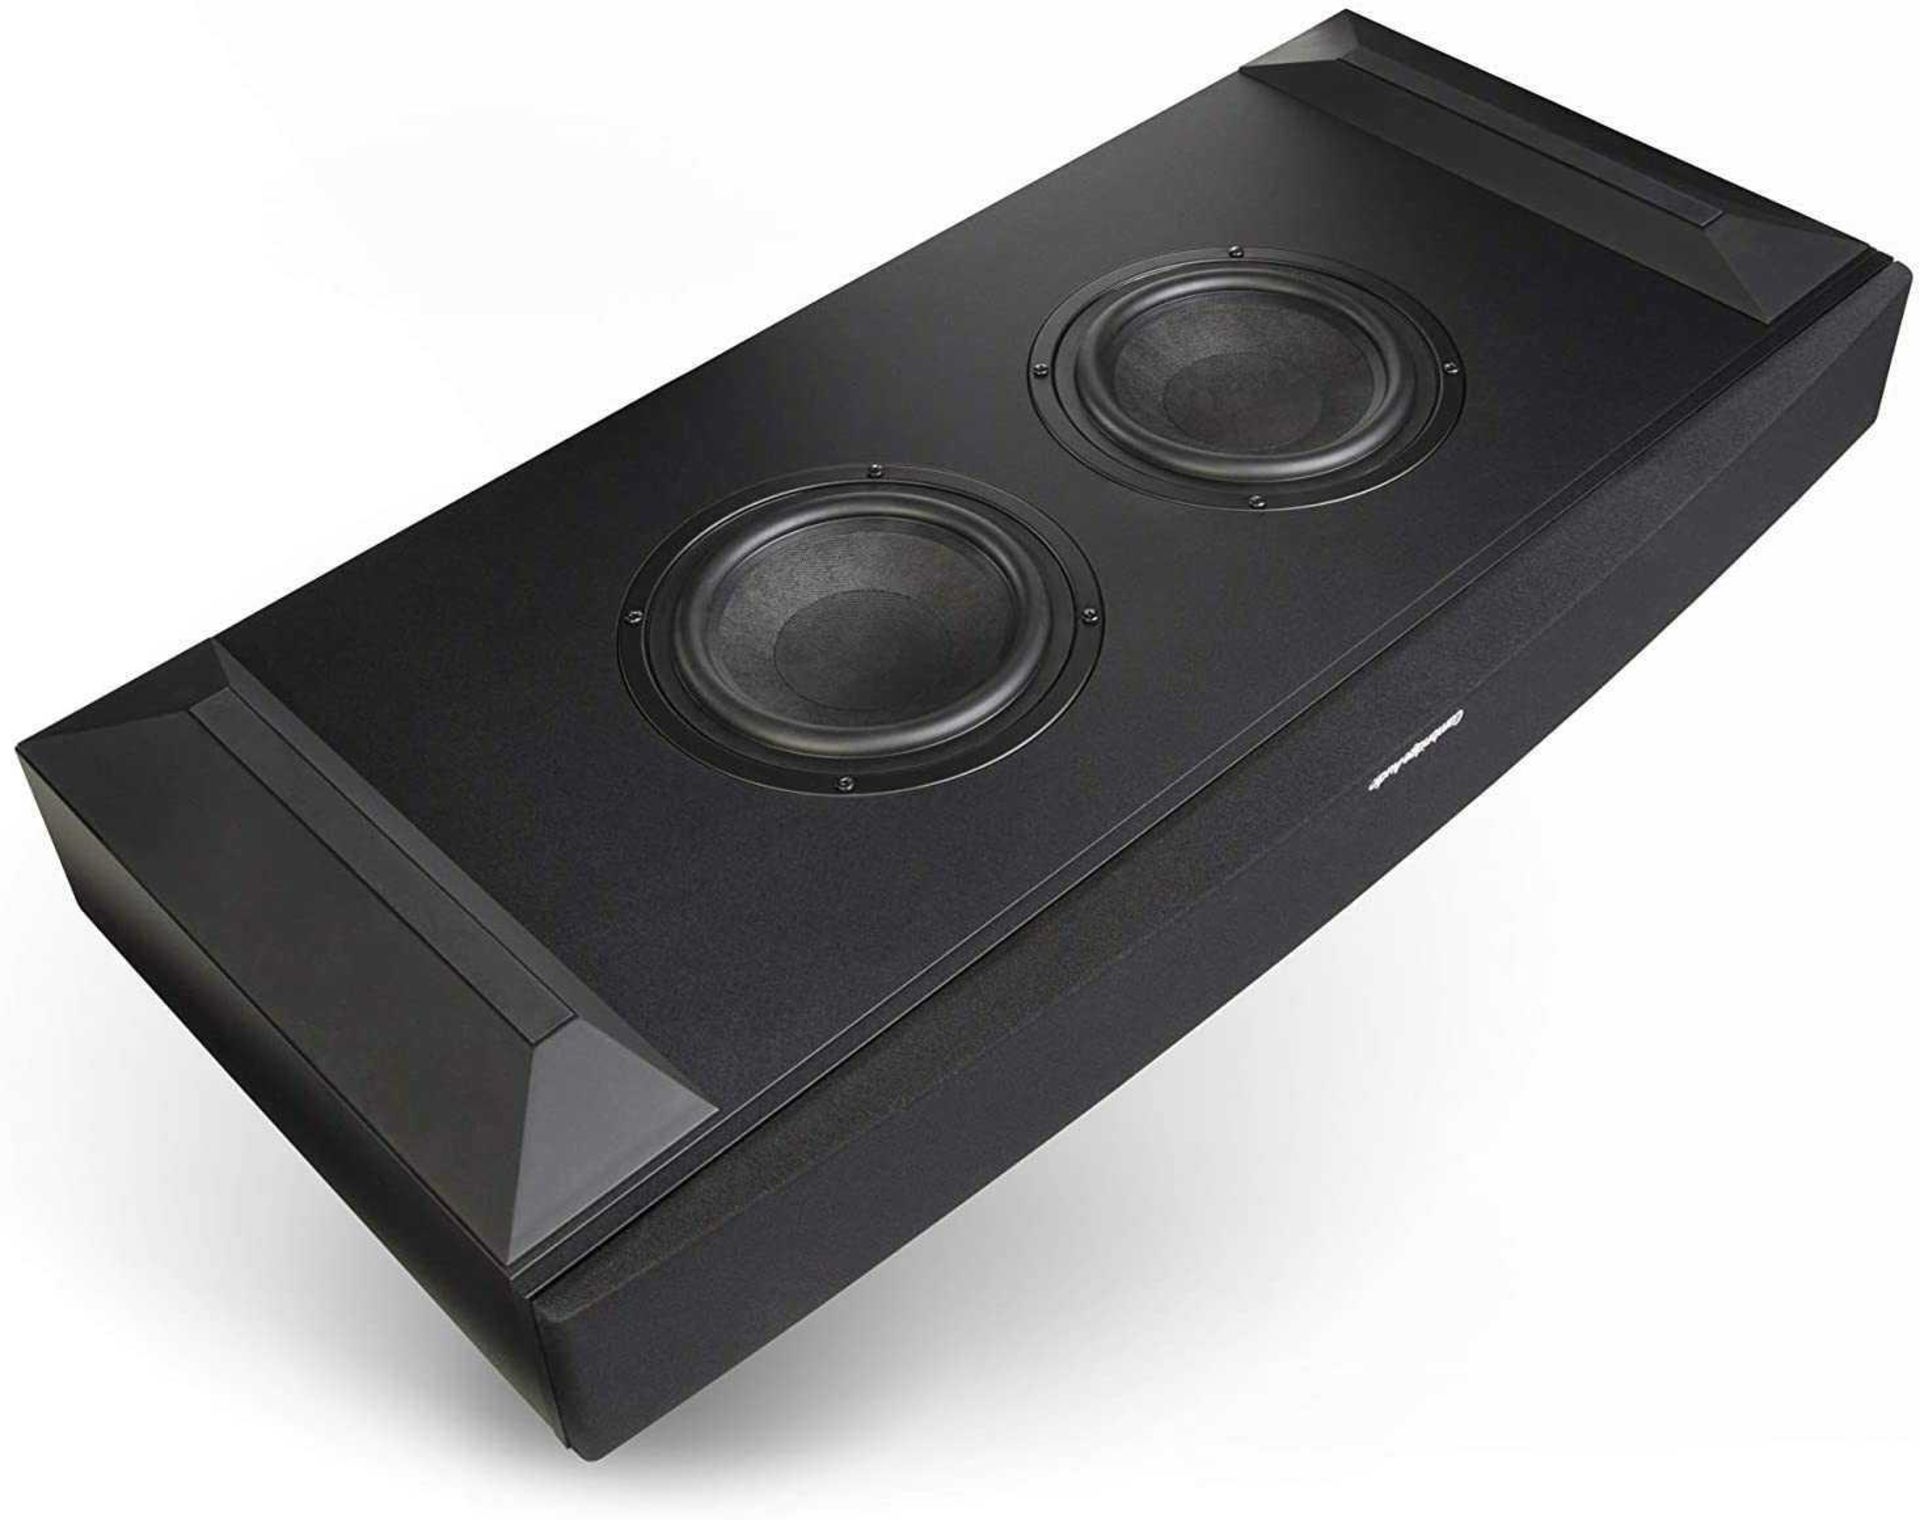 Rrp £250 Boxed Cambridge Audio Tv5 V2 Tv Speaker Base With Bluetooth (Tested & Working) - Image 2 of 4